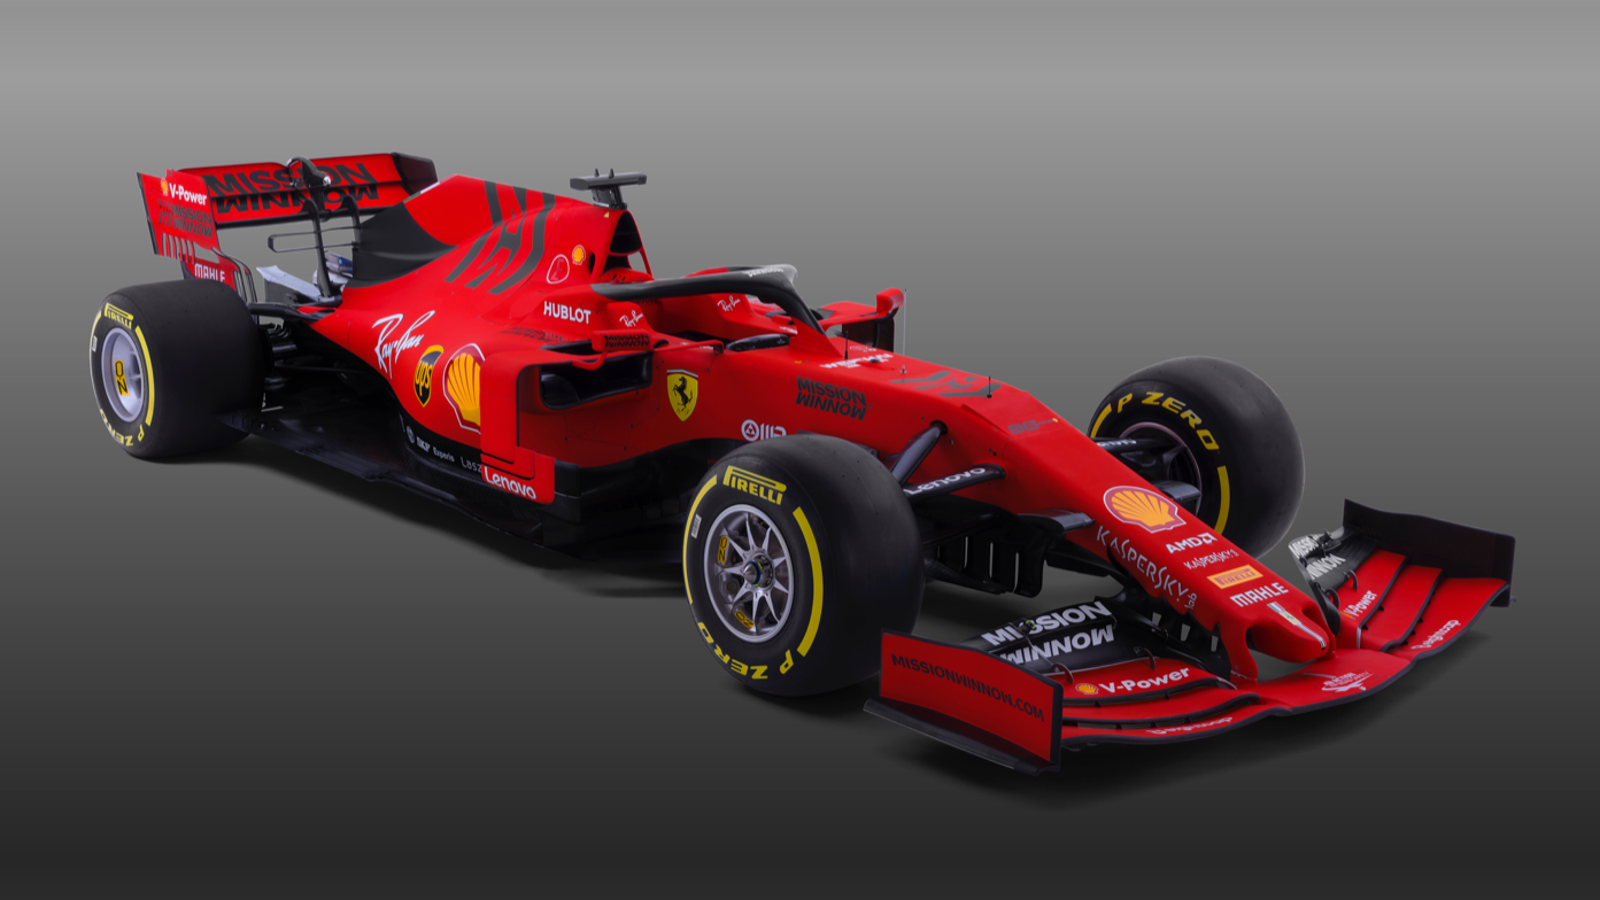 The Ferrari F1 Team S 2019 Car Livery Goes Matte For Performance Reasons